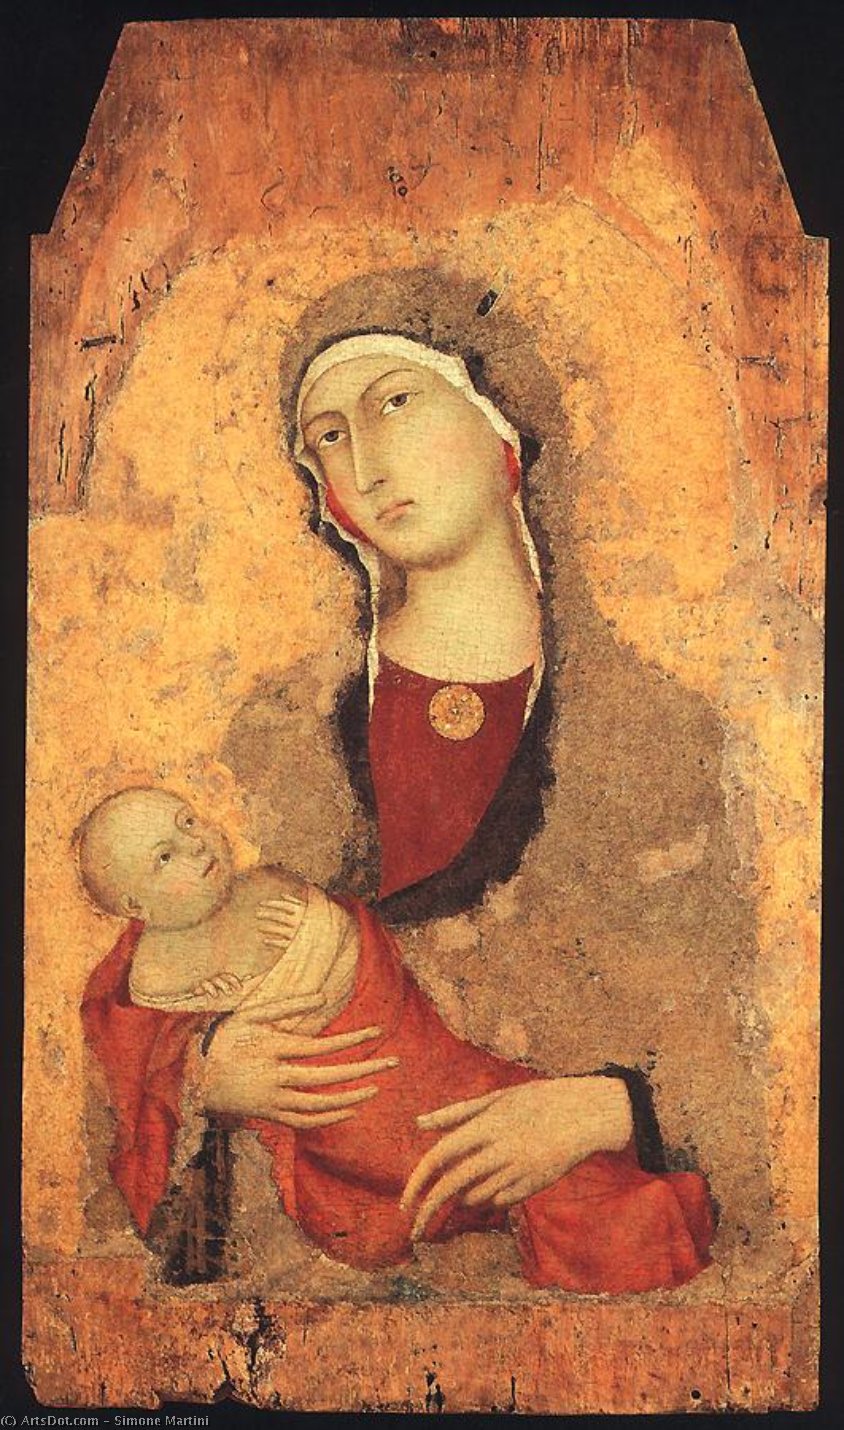 WikiOO.org - 백과 사전 - 회화, 삽화 Simone Martini - Madonna and Child (from Lucignano d'Arbia)